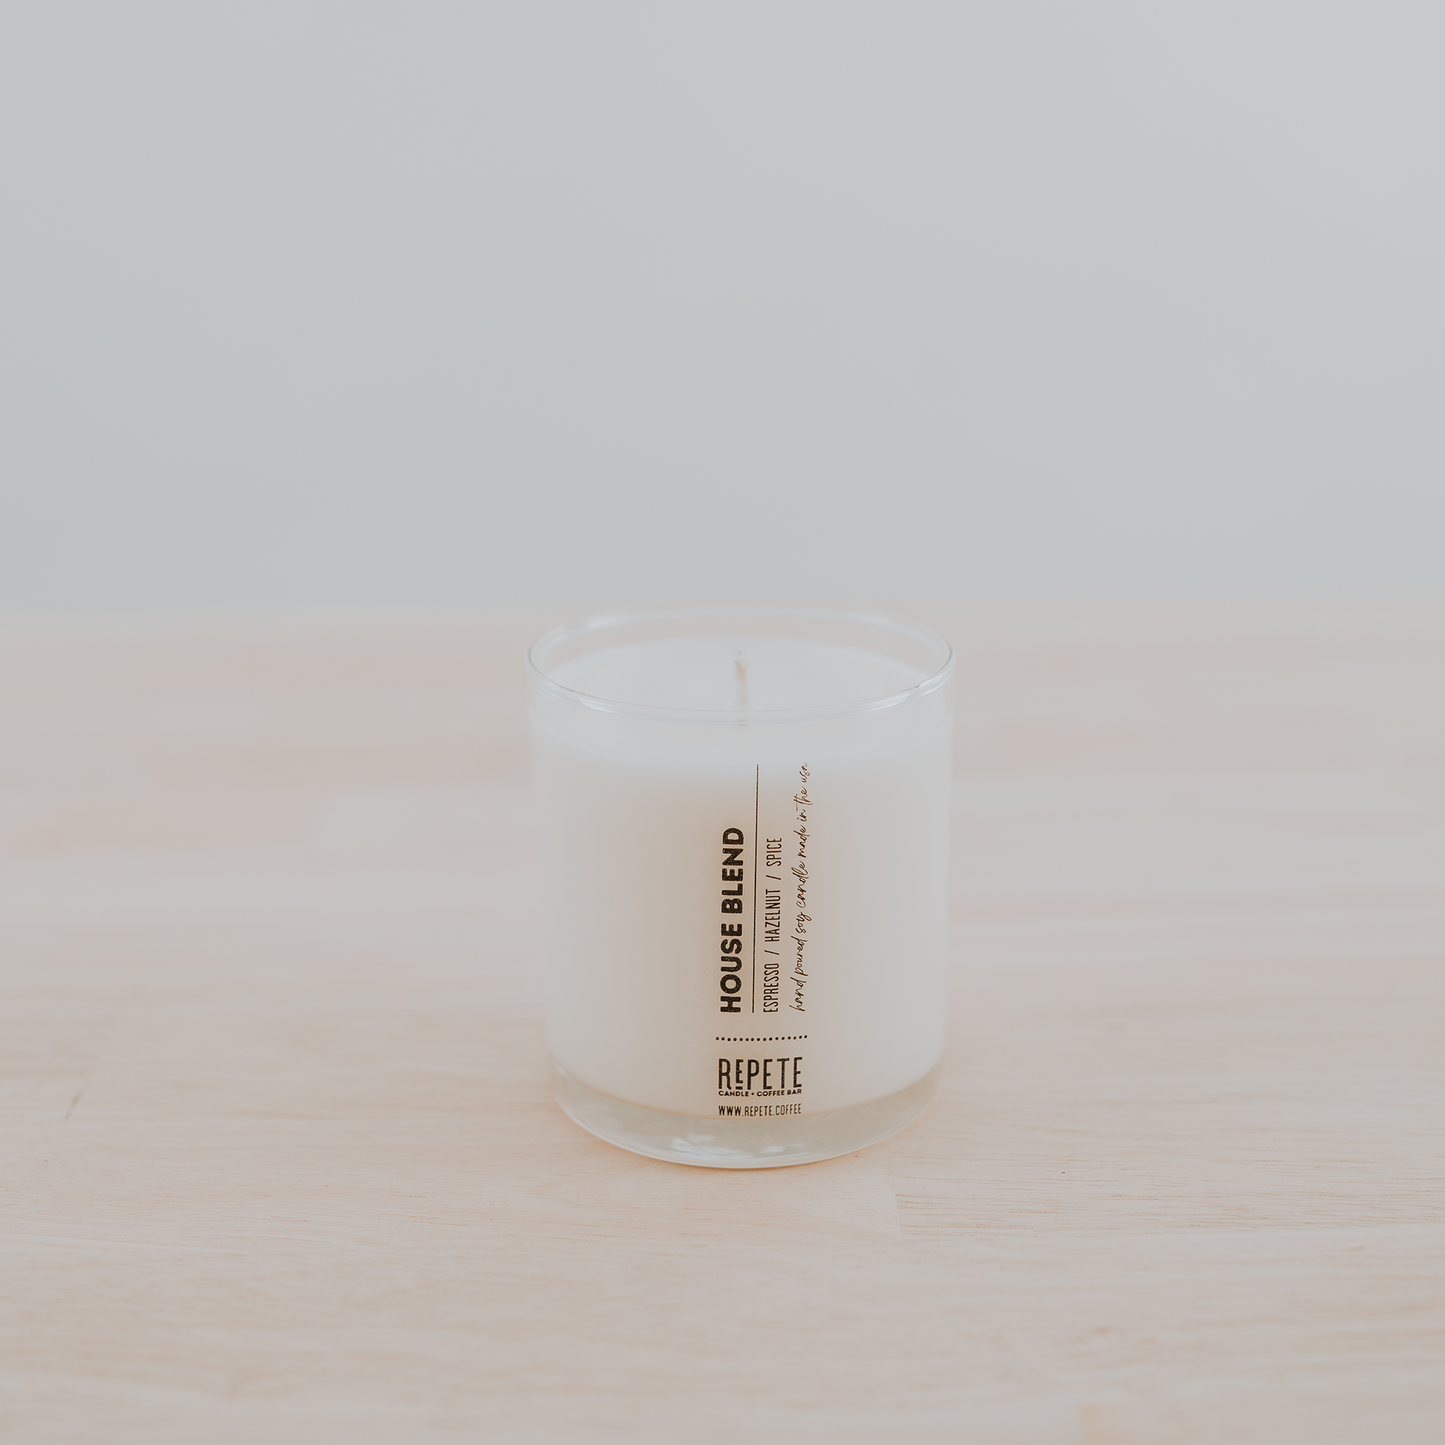 House Blend nine ounce candle from Repete Candle and Coffee Bar